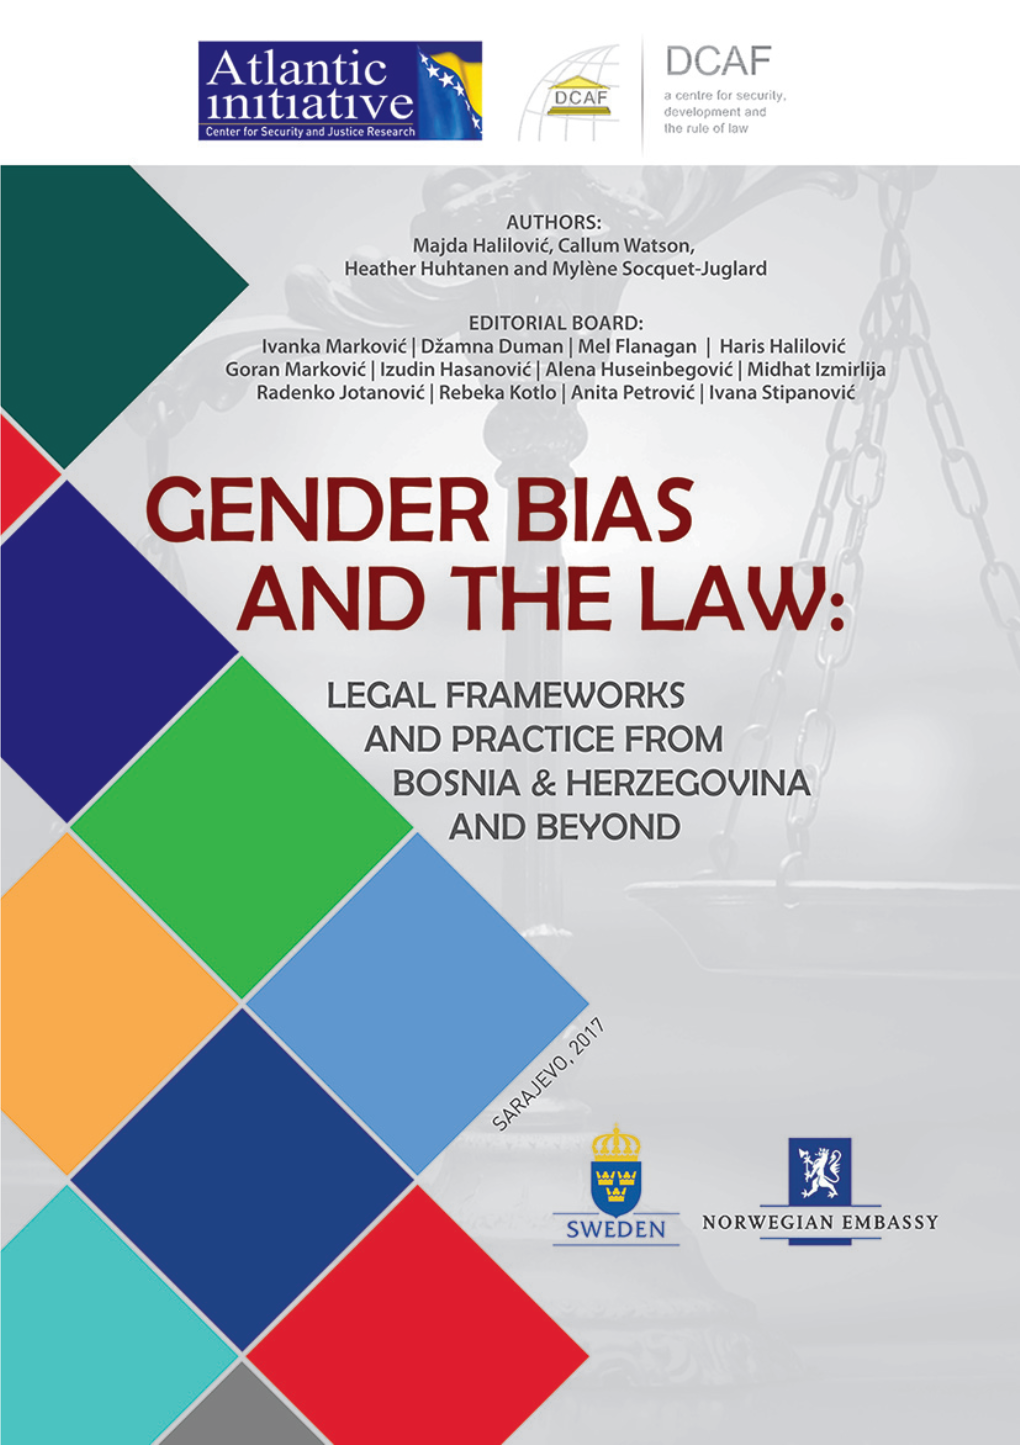 GENDER BIAS and the LAW: Legal Frameworks and Practice from Bosnia & Herzegovina and Beyond